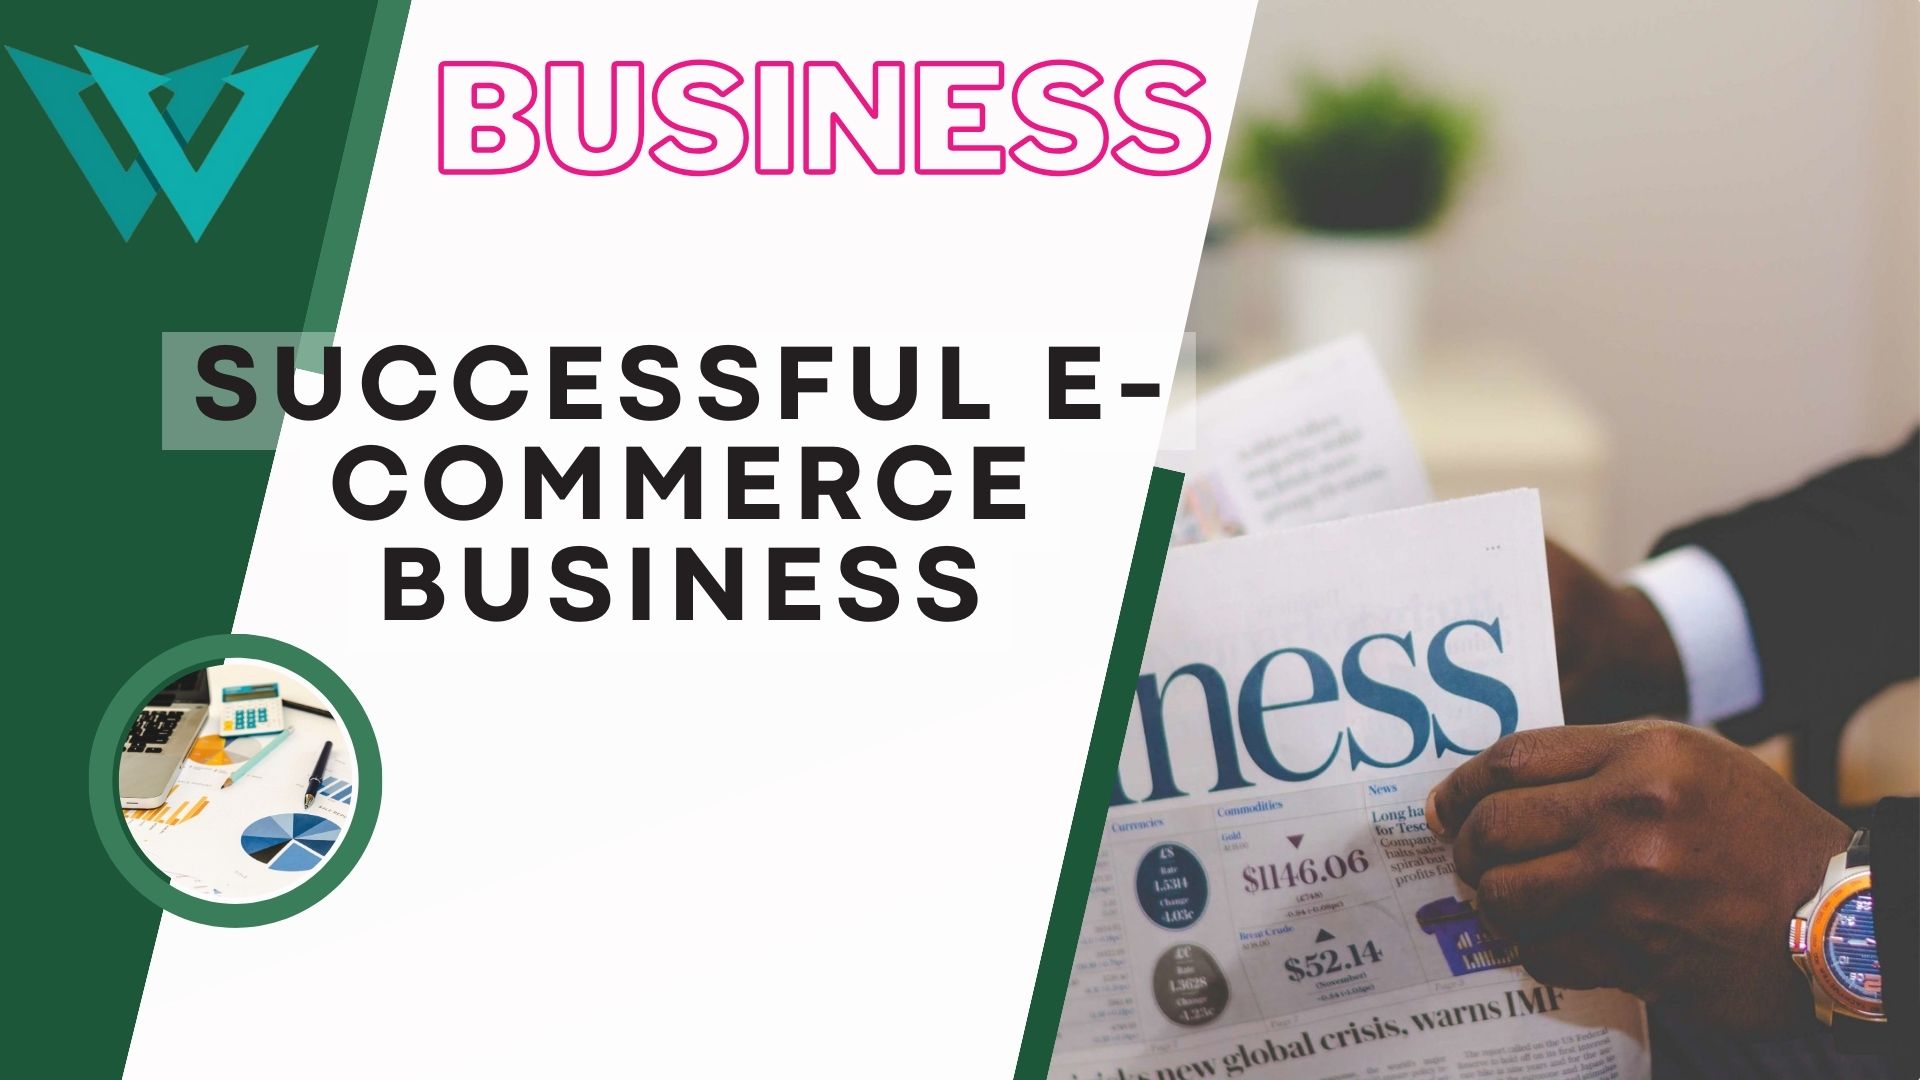 How to build a successful e-commerce business